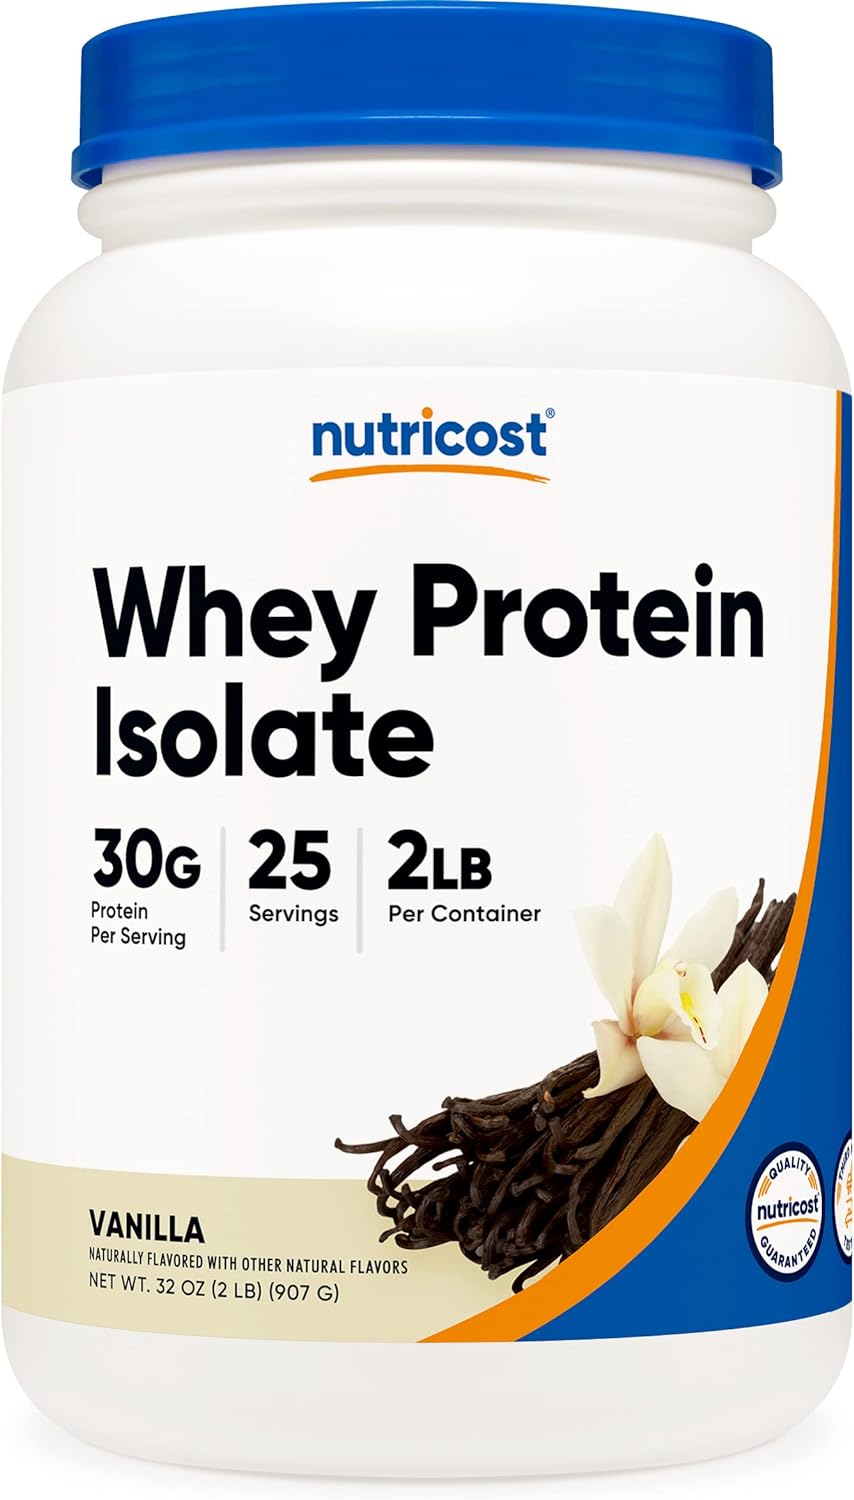 Nutricost Whey Protein Isolate Powder (Vanilla) 2LBS2 Pound (Pack of 1